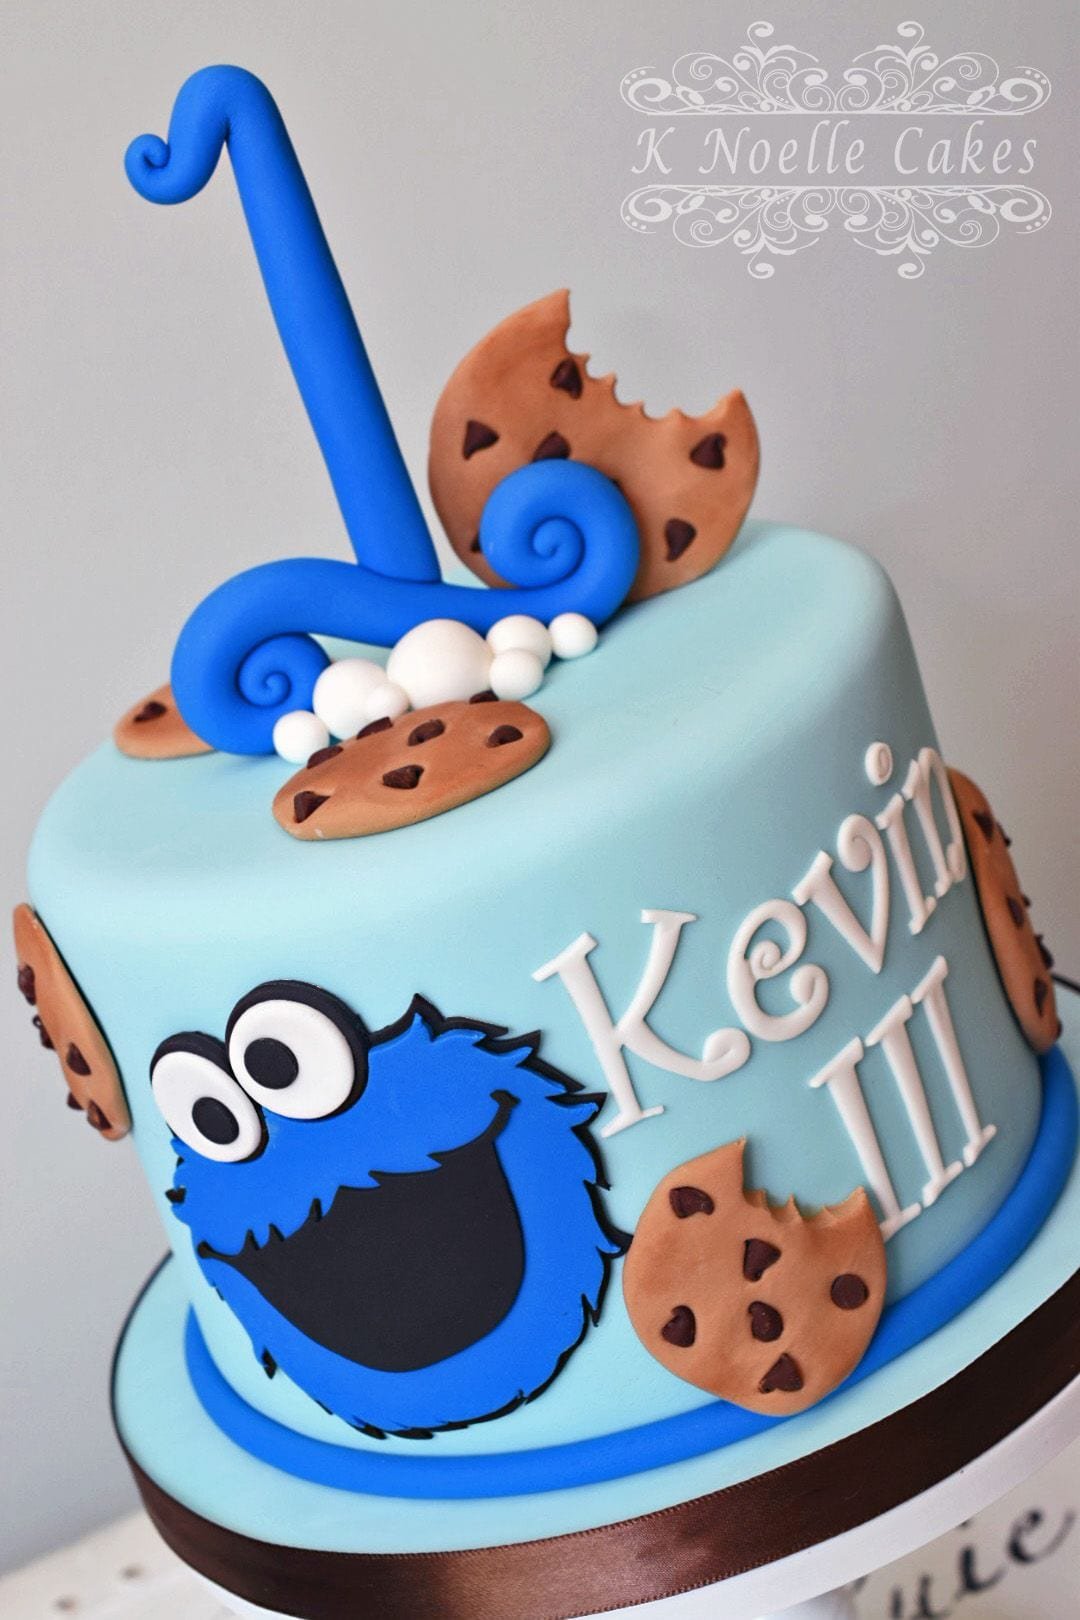 Cookie Monster Theme 1st Birthday Cake By K Noelle Cakes